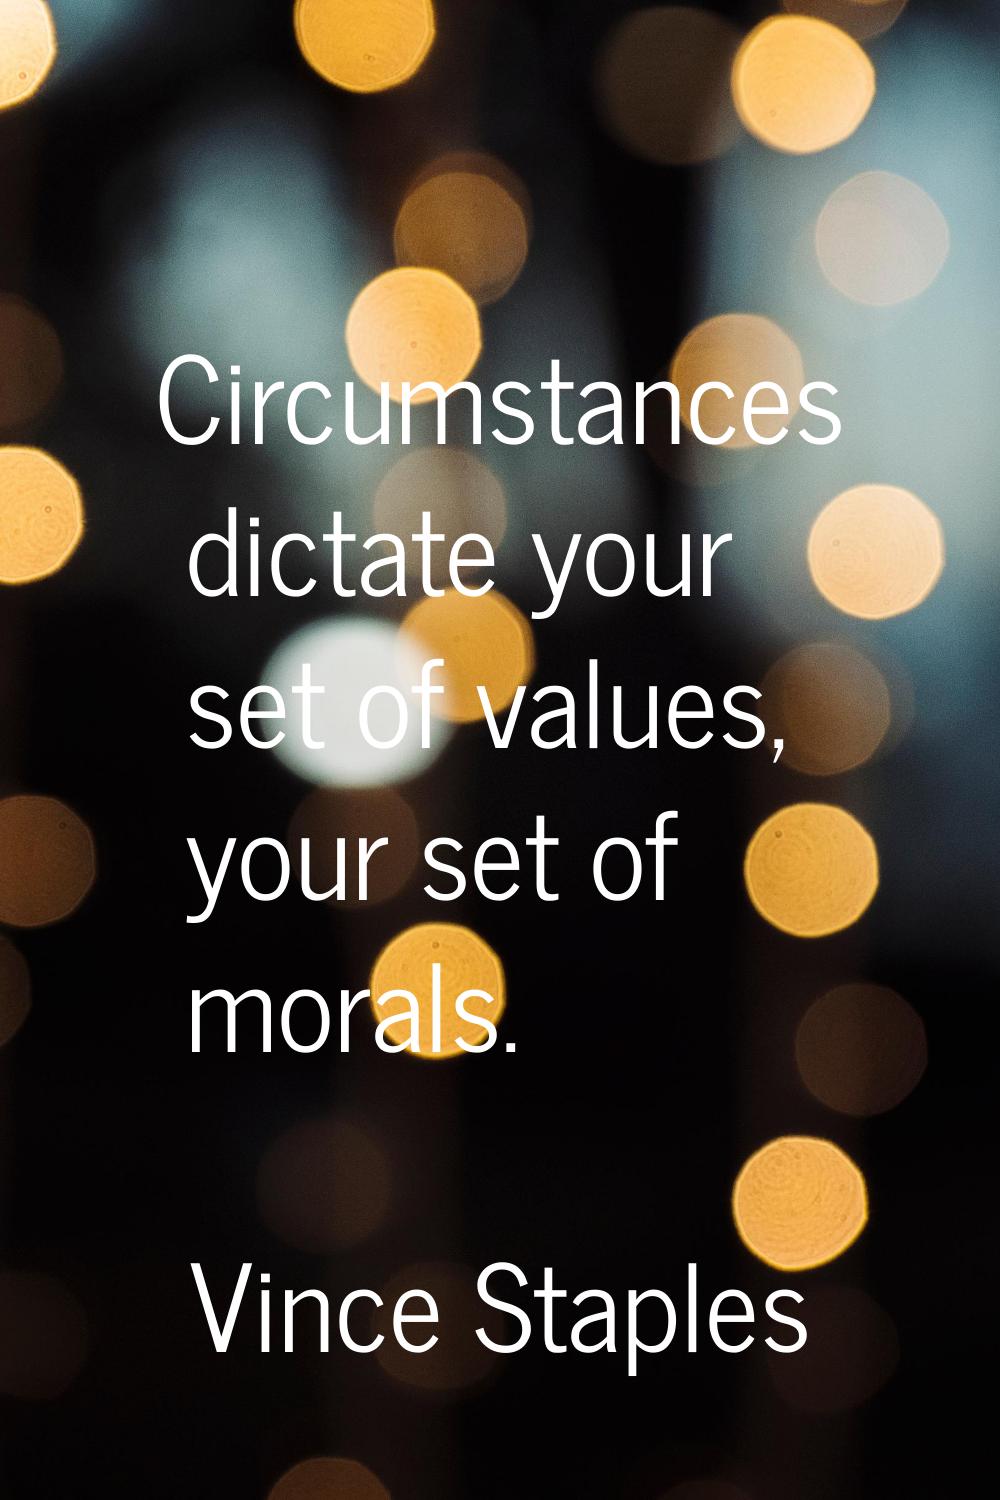 Circumstances dictate your set of values, your set of morals.